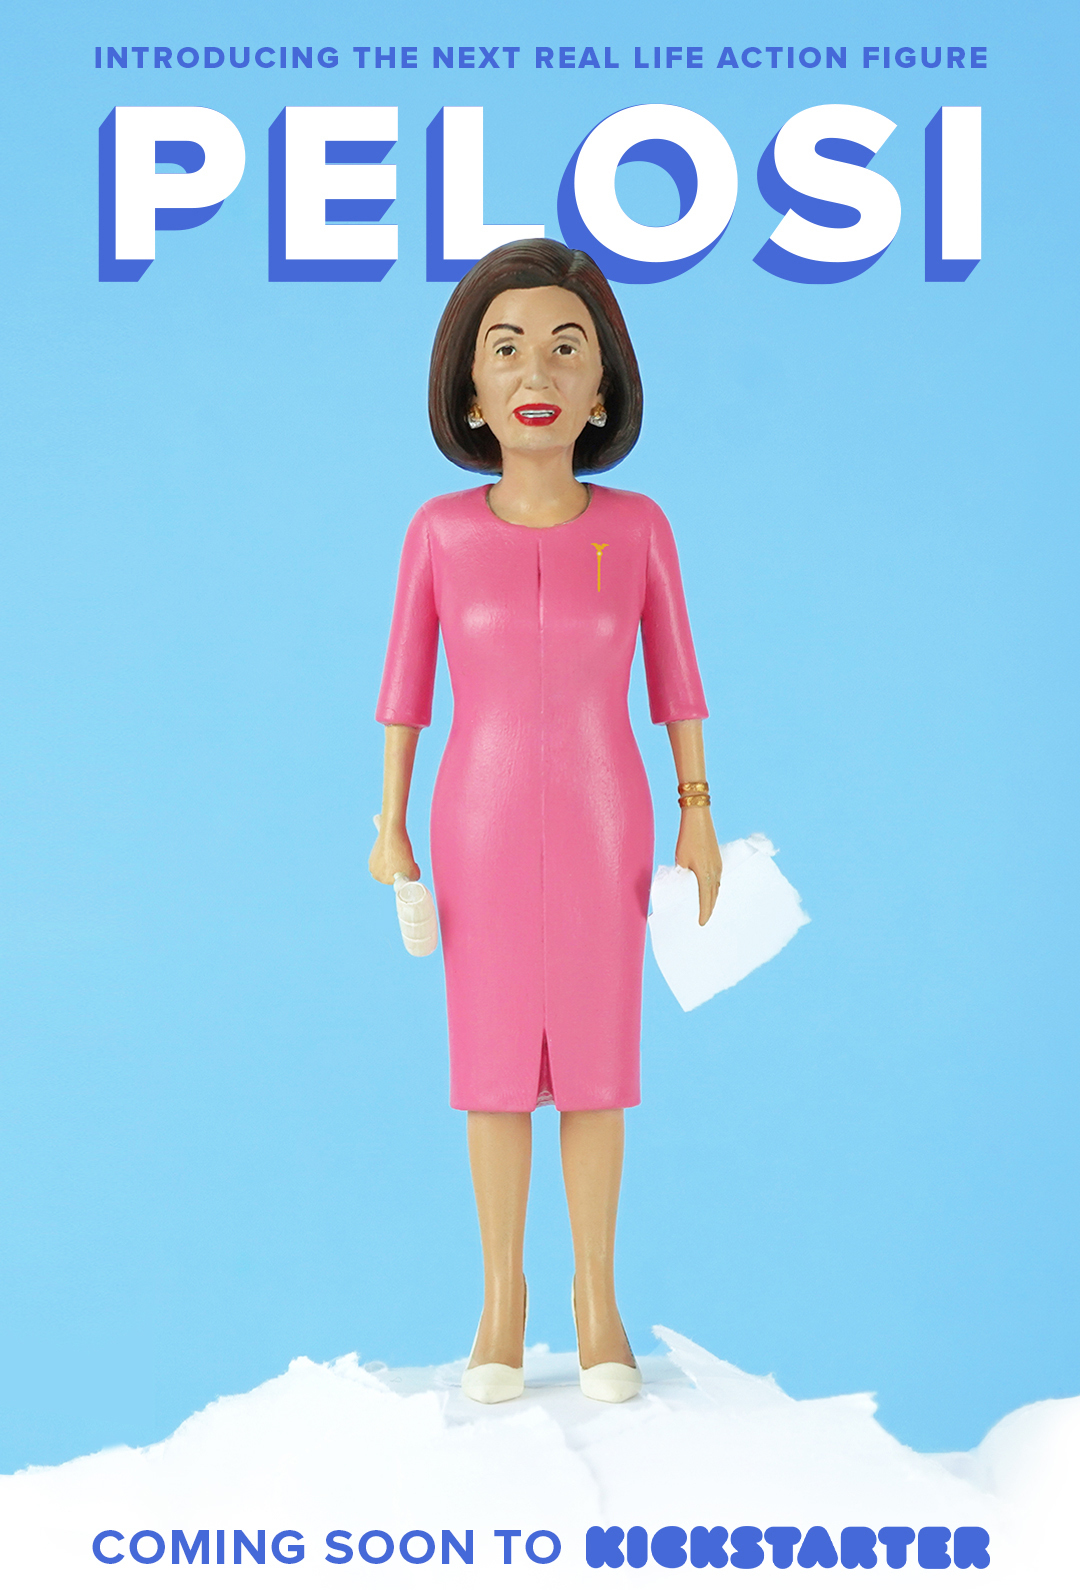 Introducing the next Real Life Action Figure... Nancy Pelosi!